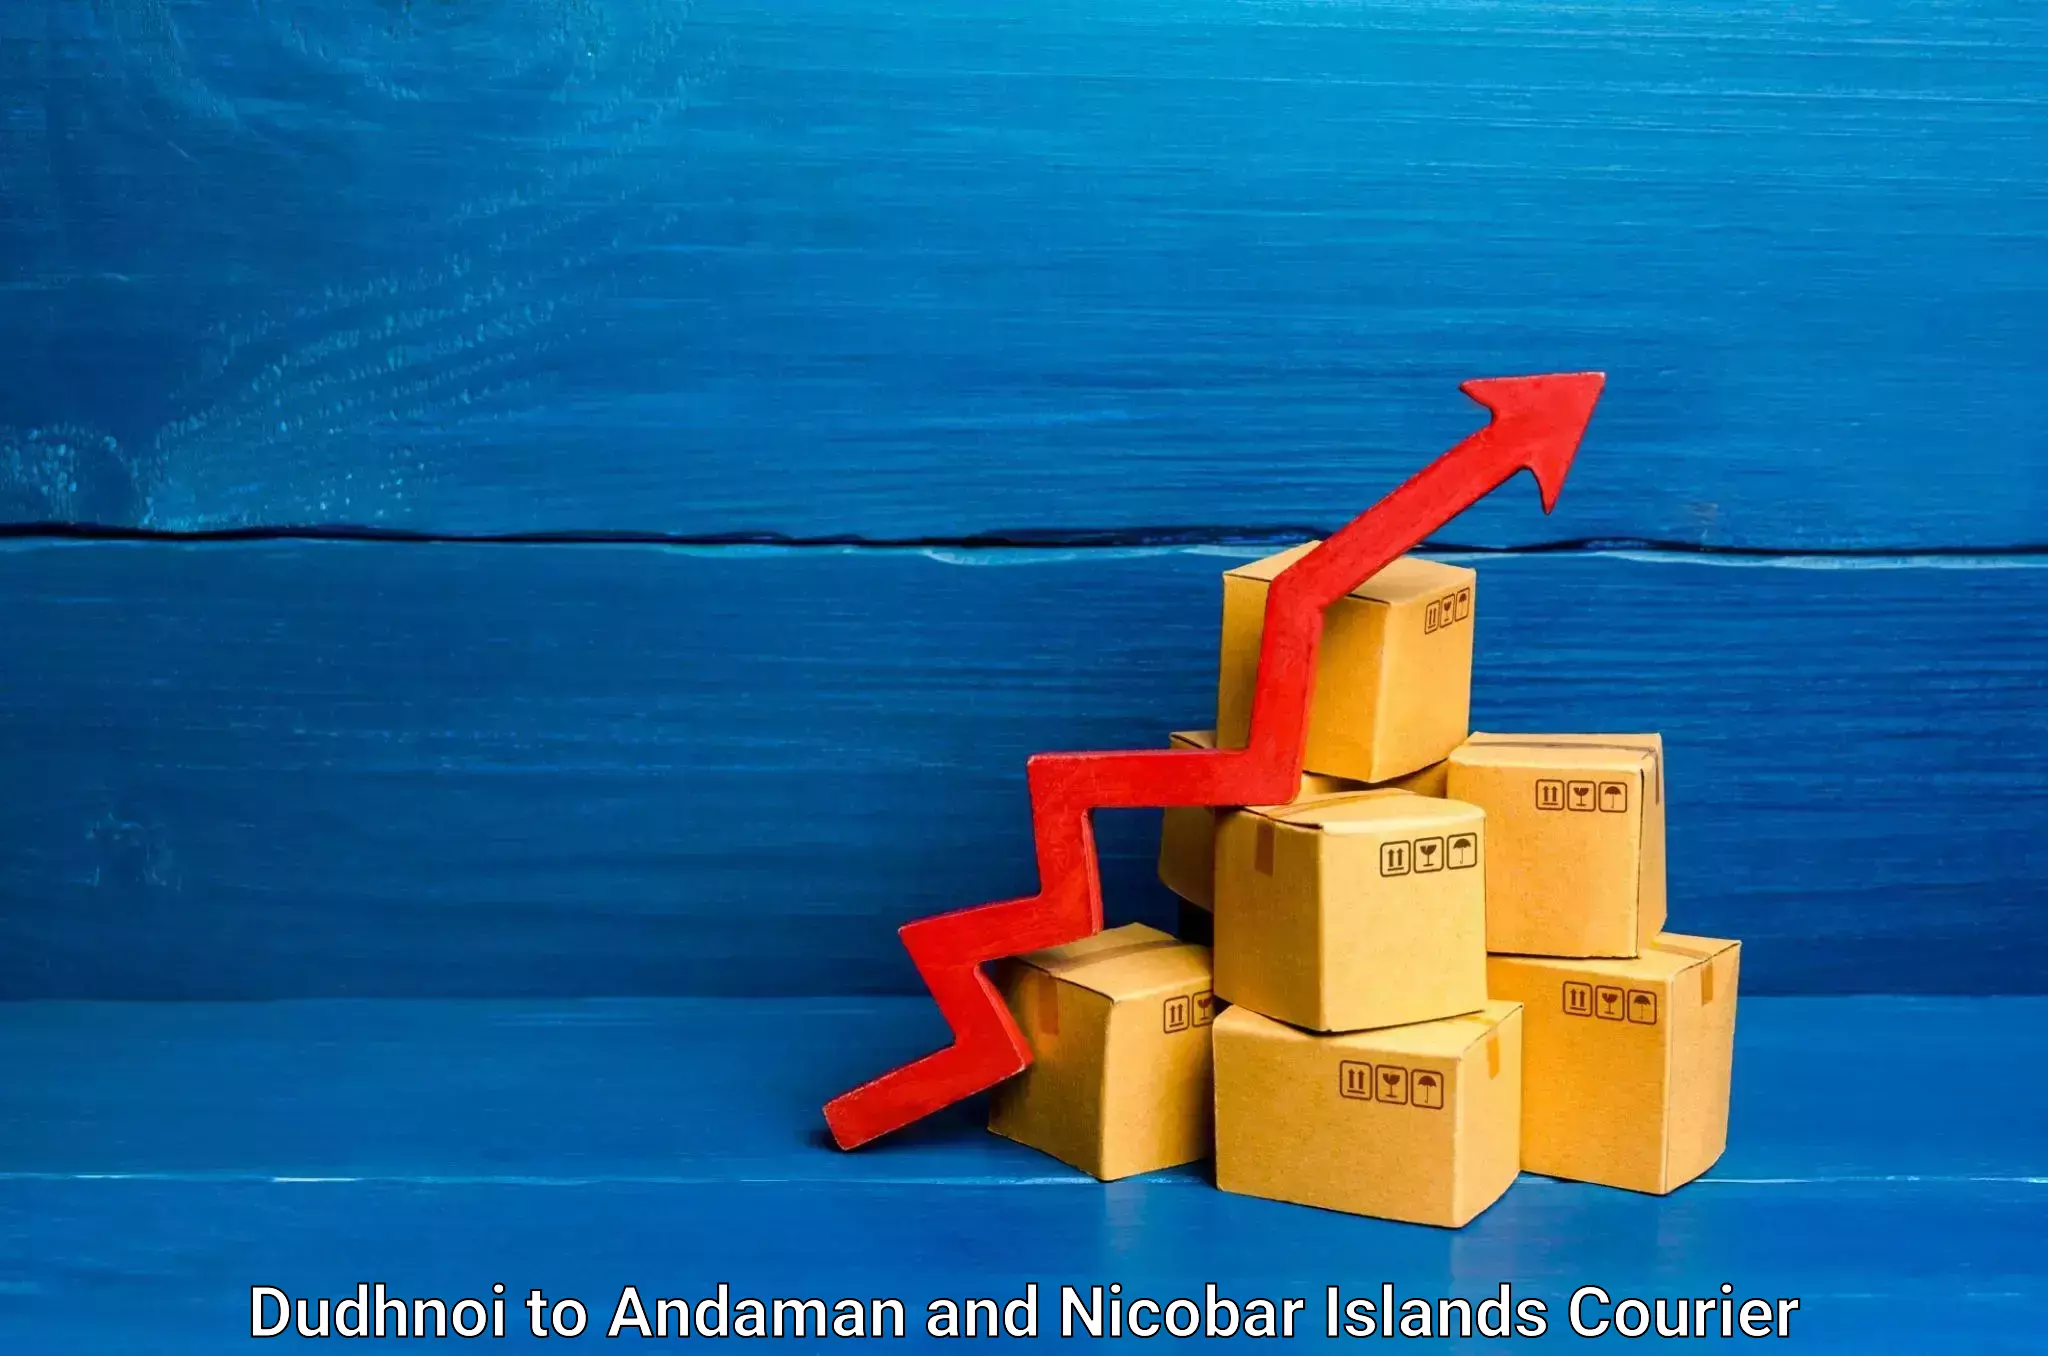 E-commerce logistics support Dudhnoi to Andaman and Nicobar Islands